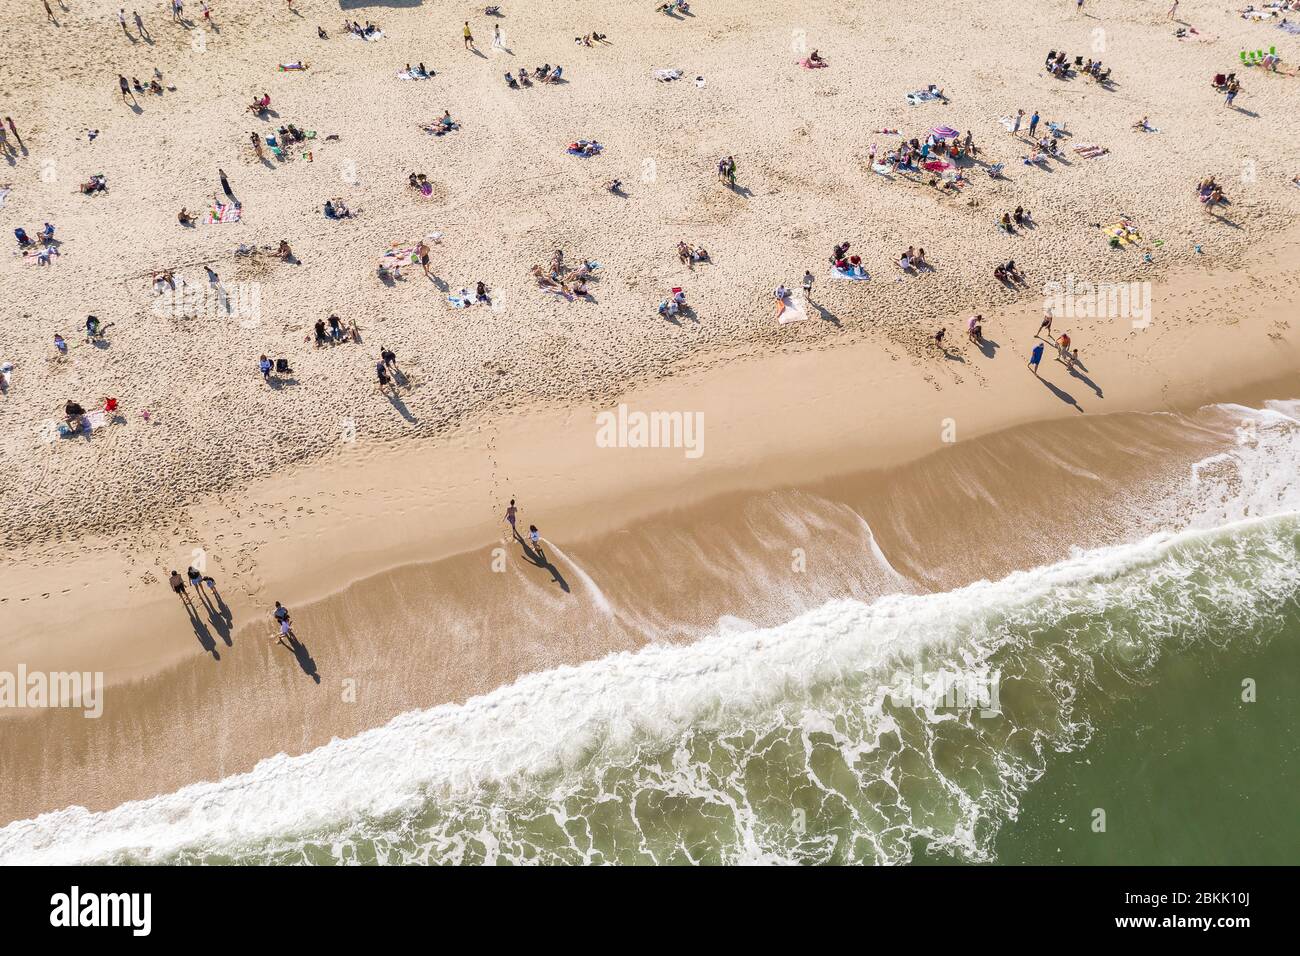 Aerial view of a crowded Jersey Shore beach in Long Branch, New Jersey.  Despite the Coronavirus pandemic beachgoers flocked to the shore amidst the warm weather and recent beach re-openings. Stock Photo